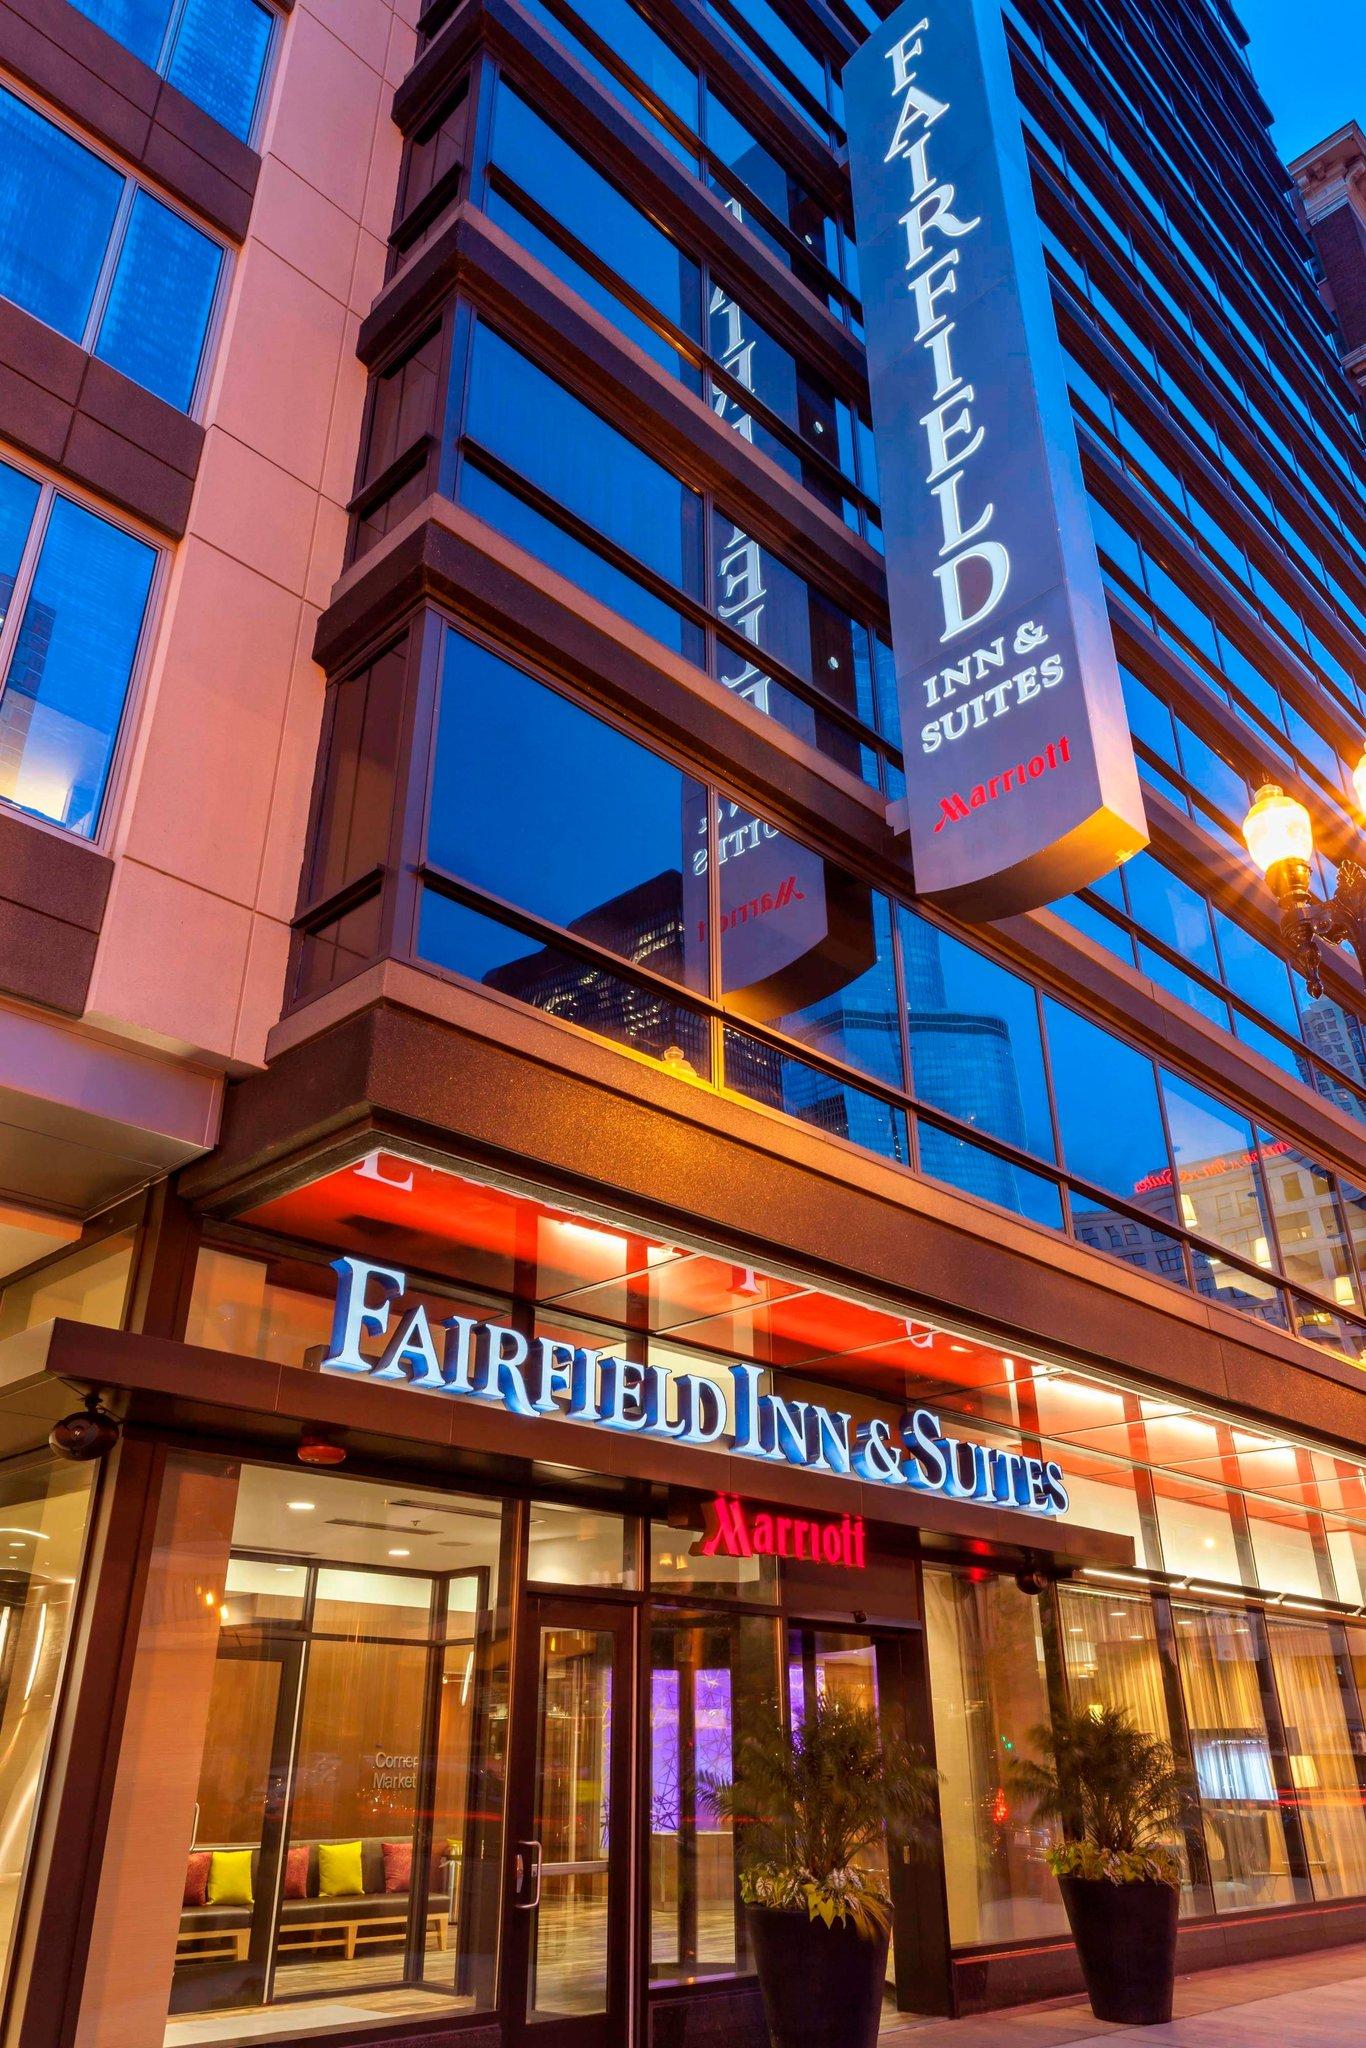 Fairfield Inn & Suites Chicago Downtown/River North in Chicago, IL